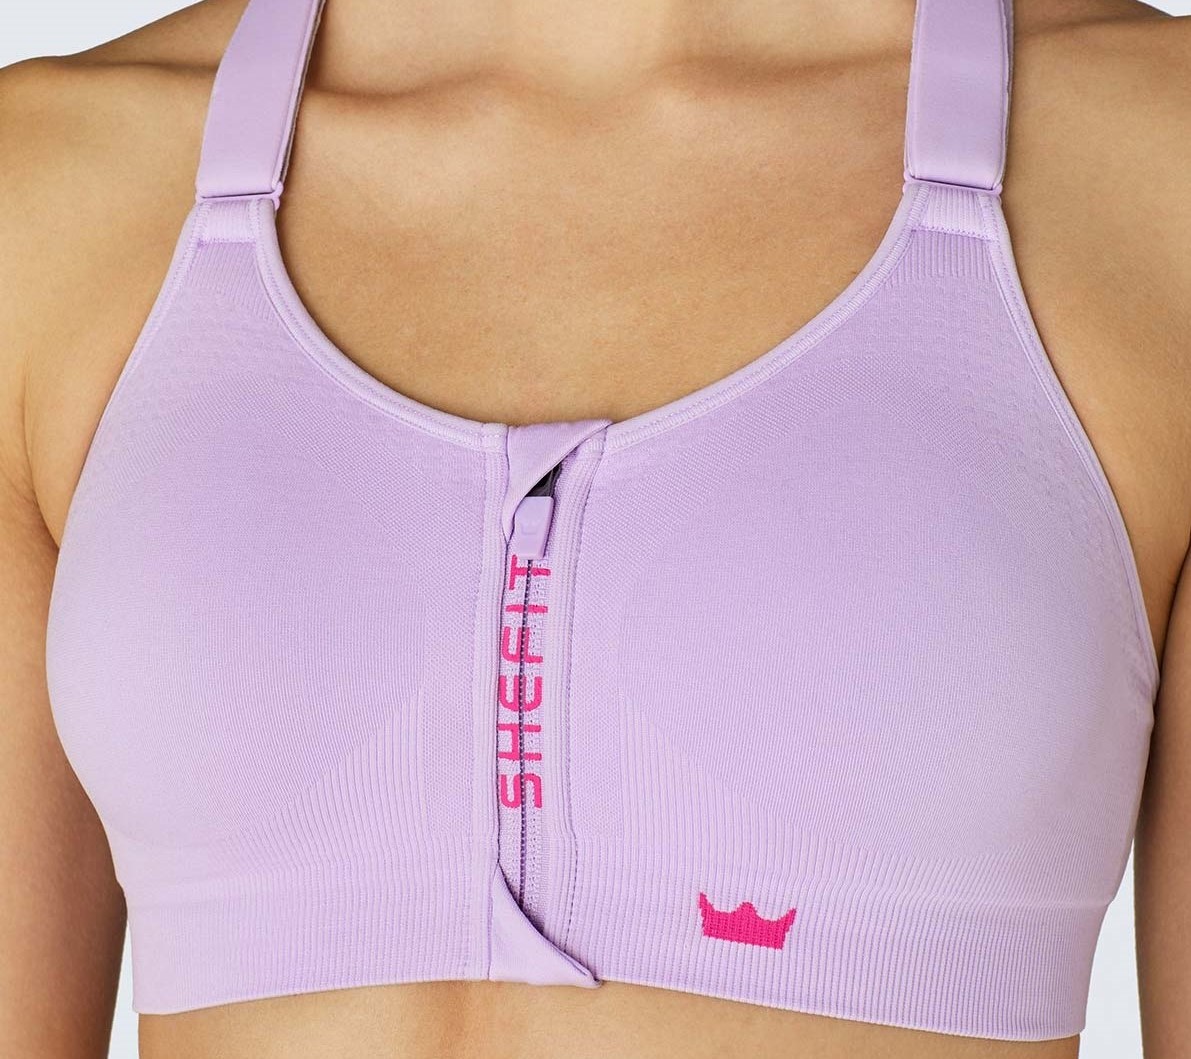 What Is Low Impact Sports Bra